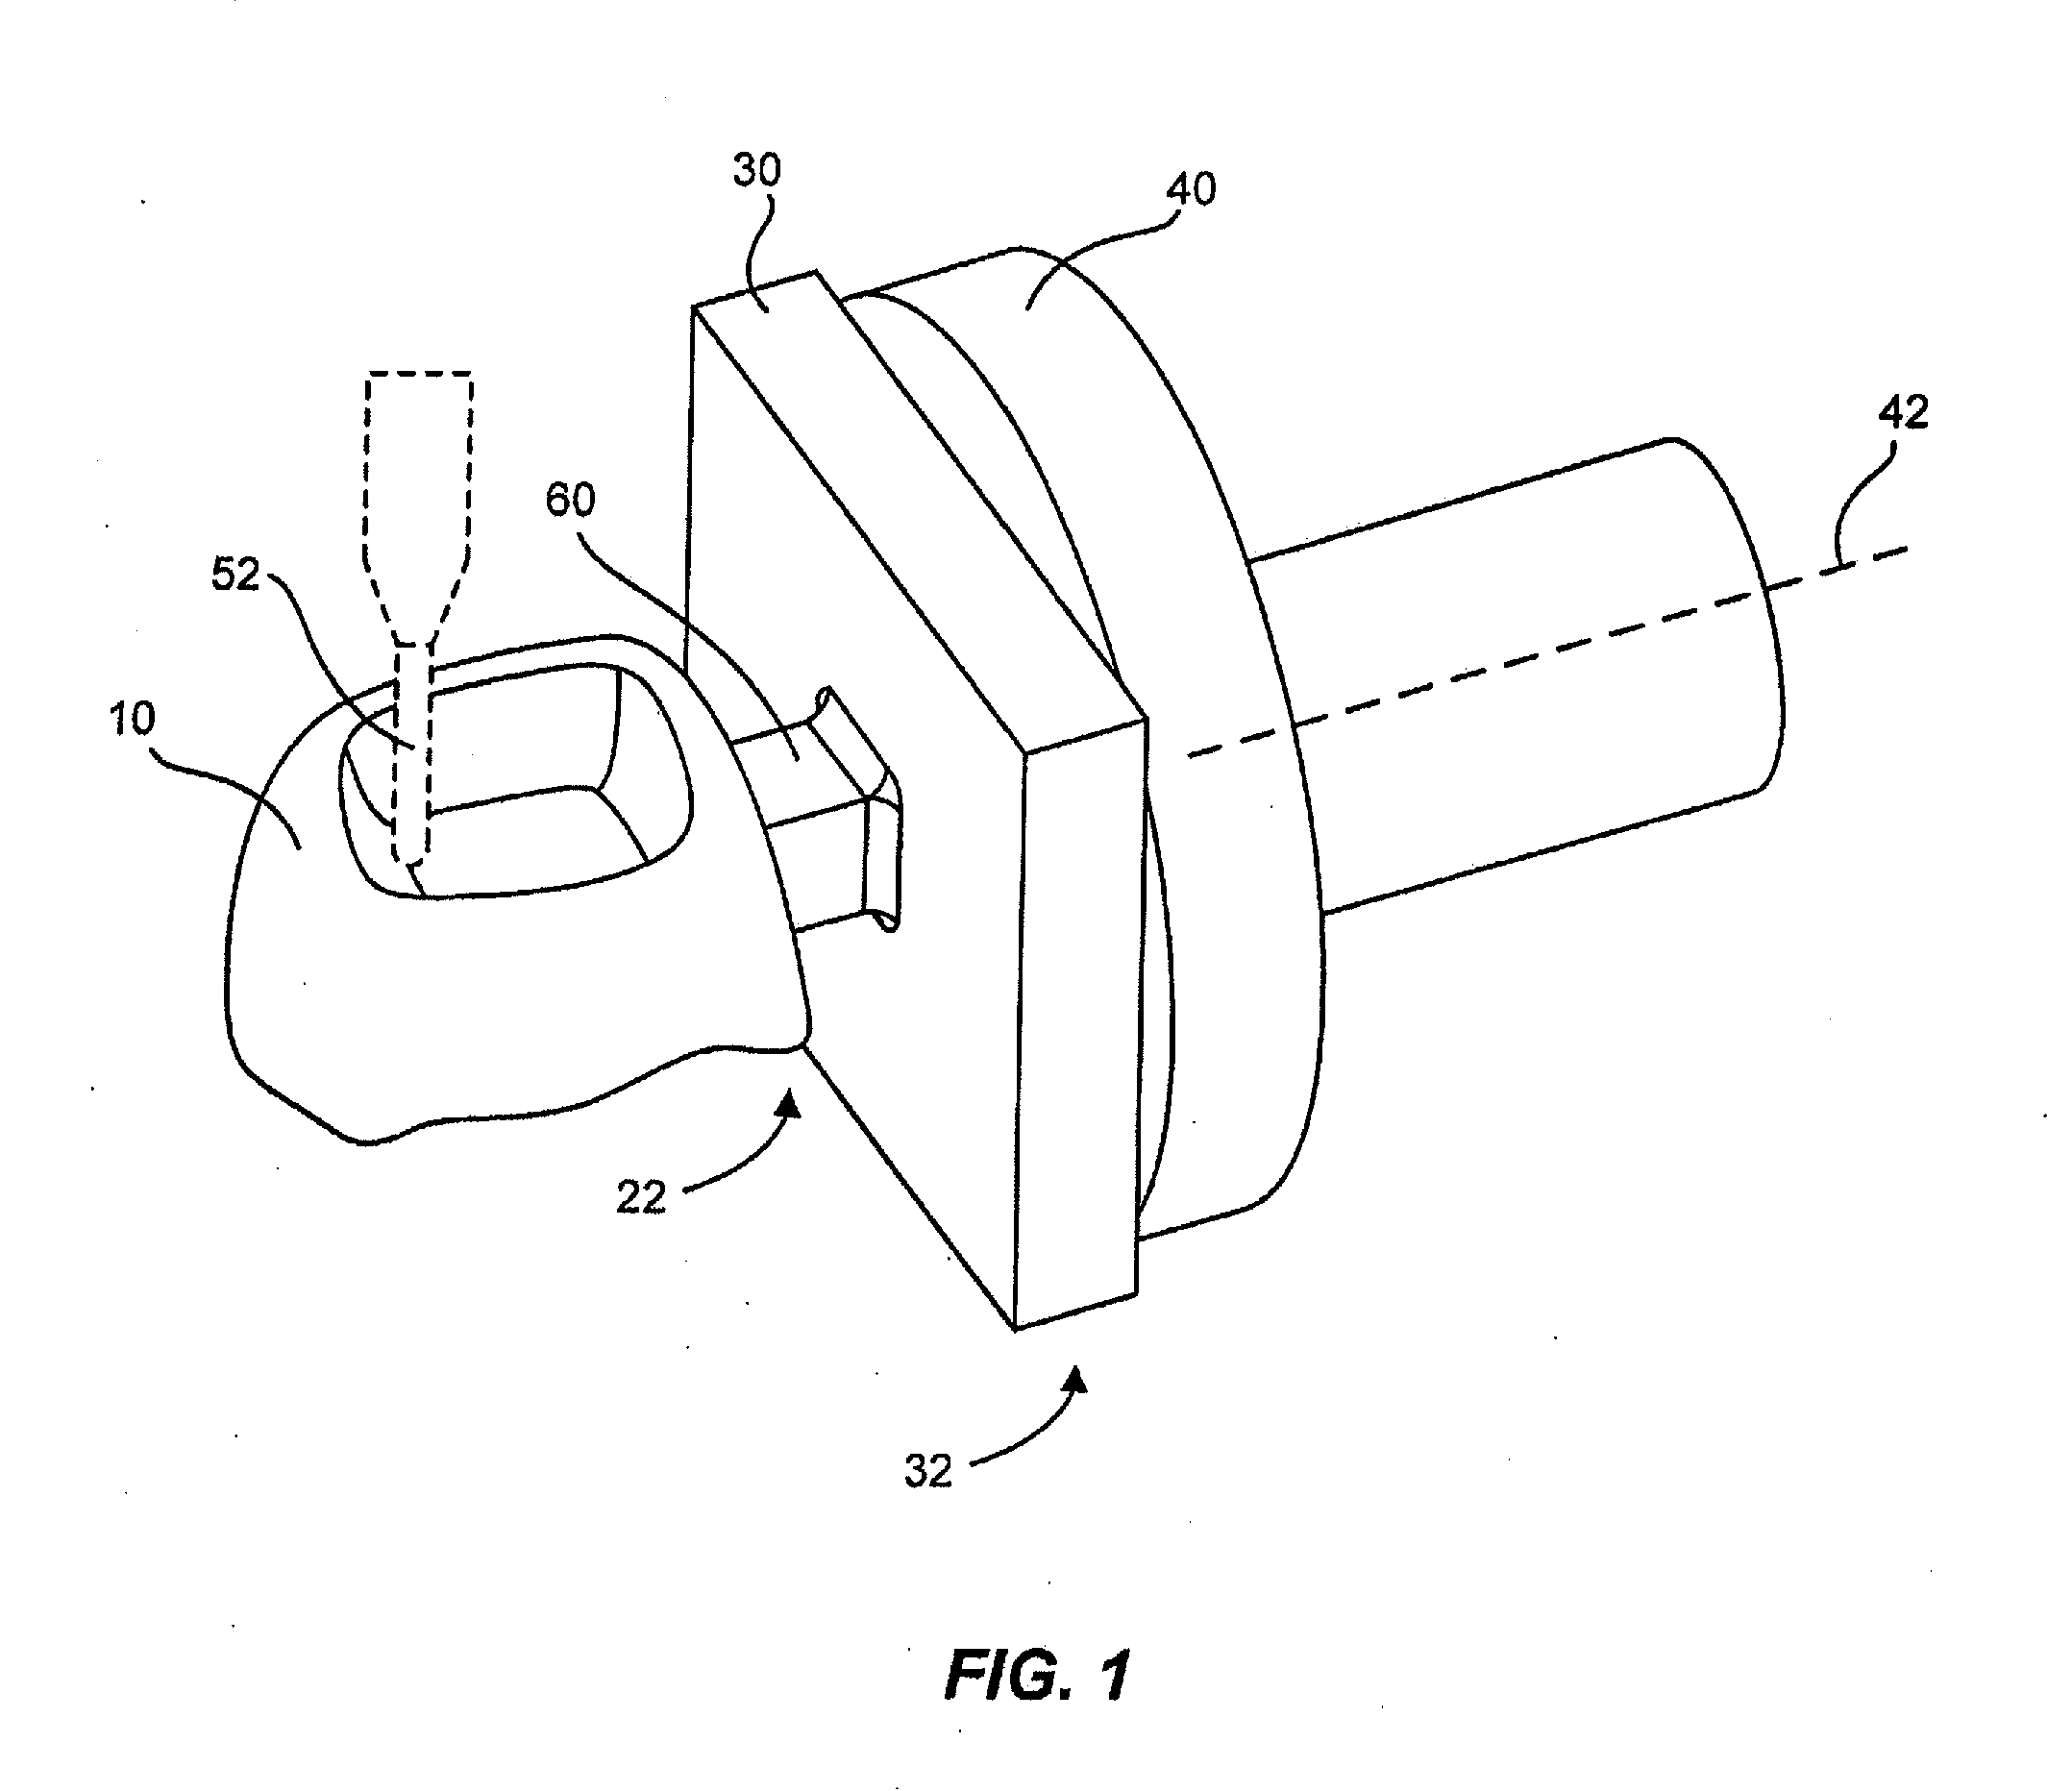 Method for Machining a Dental Prosthesis